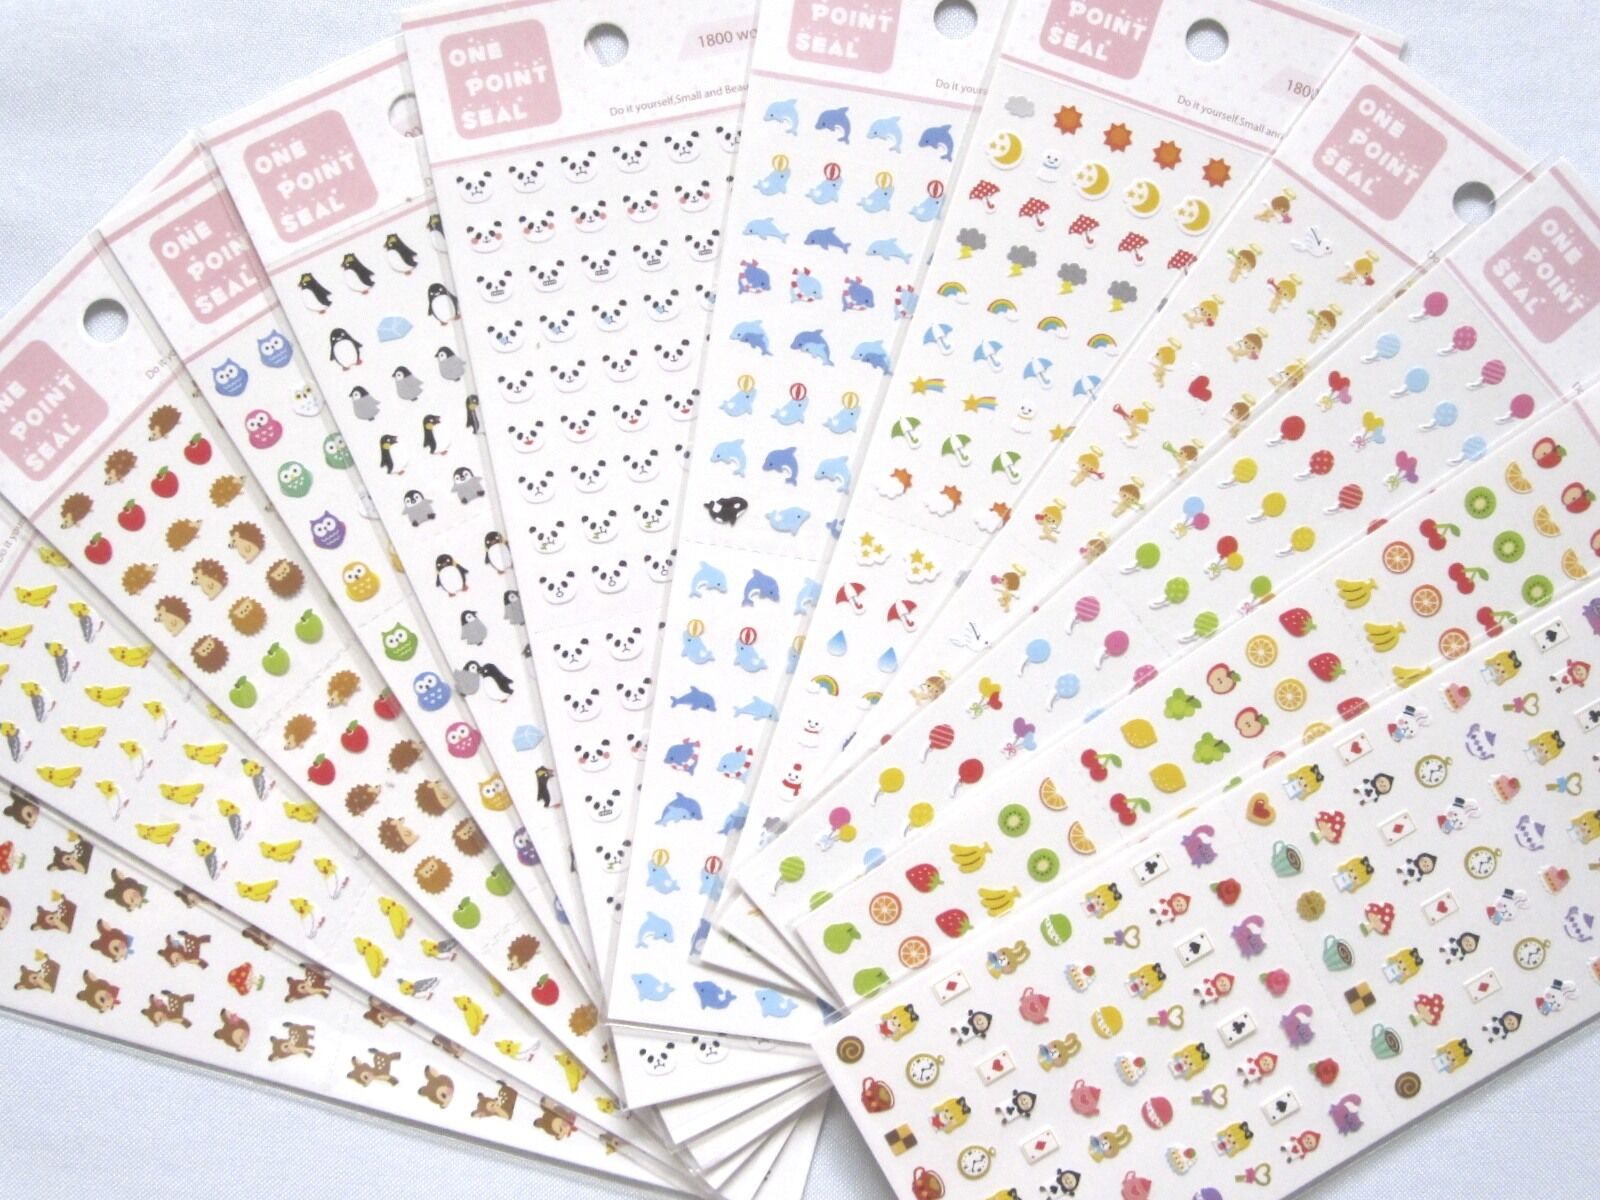 One Point Seal Made In Korea Sticker Sheet Version 2 (your Choice)~kawaii!!